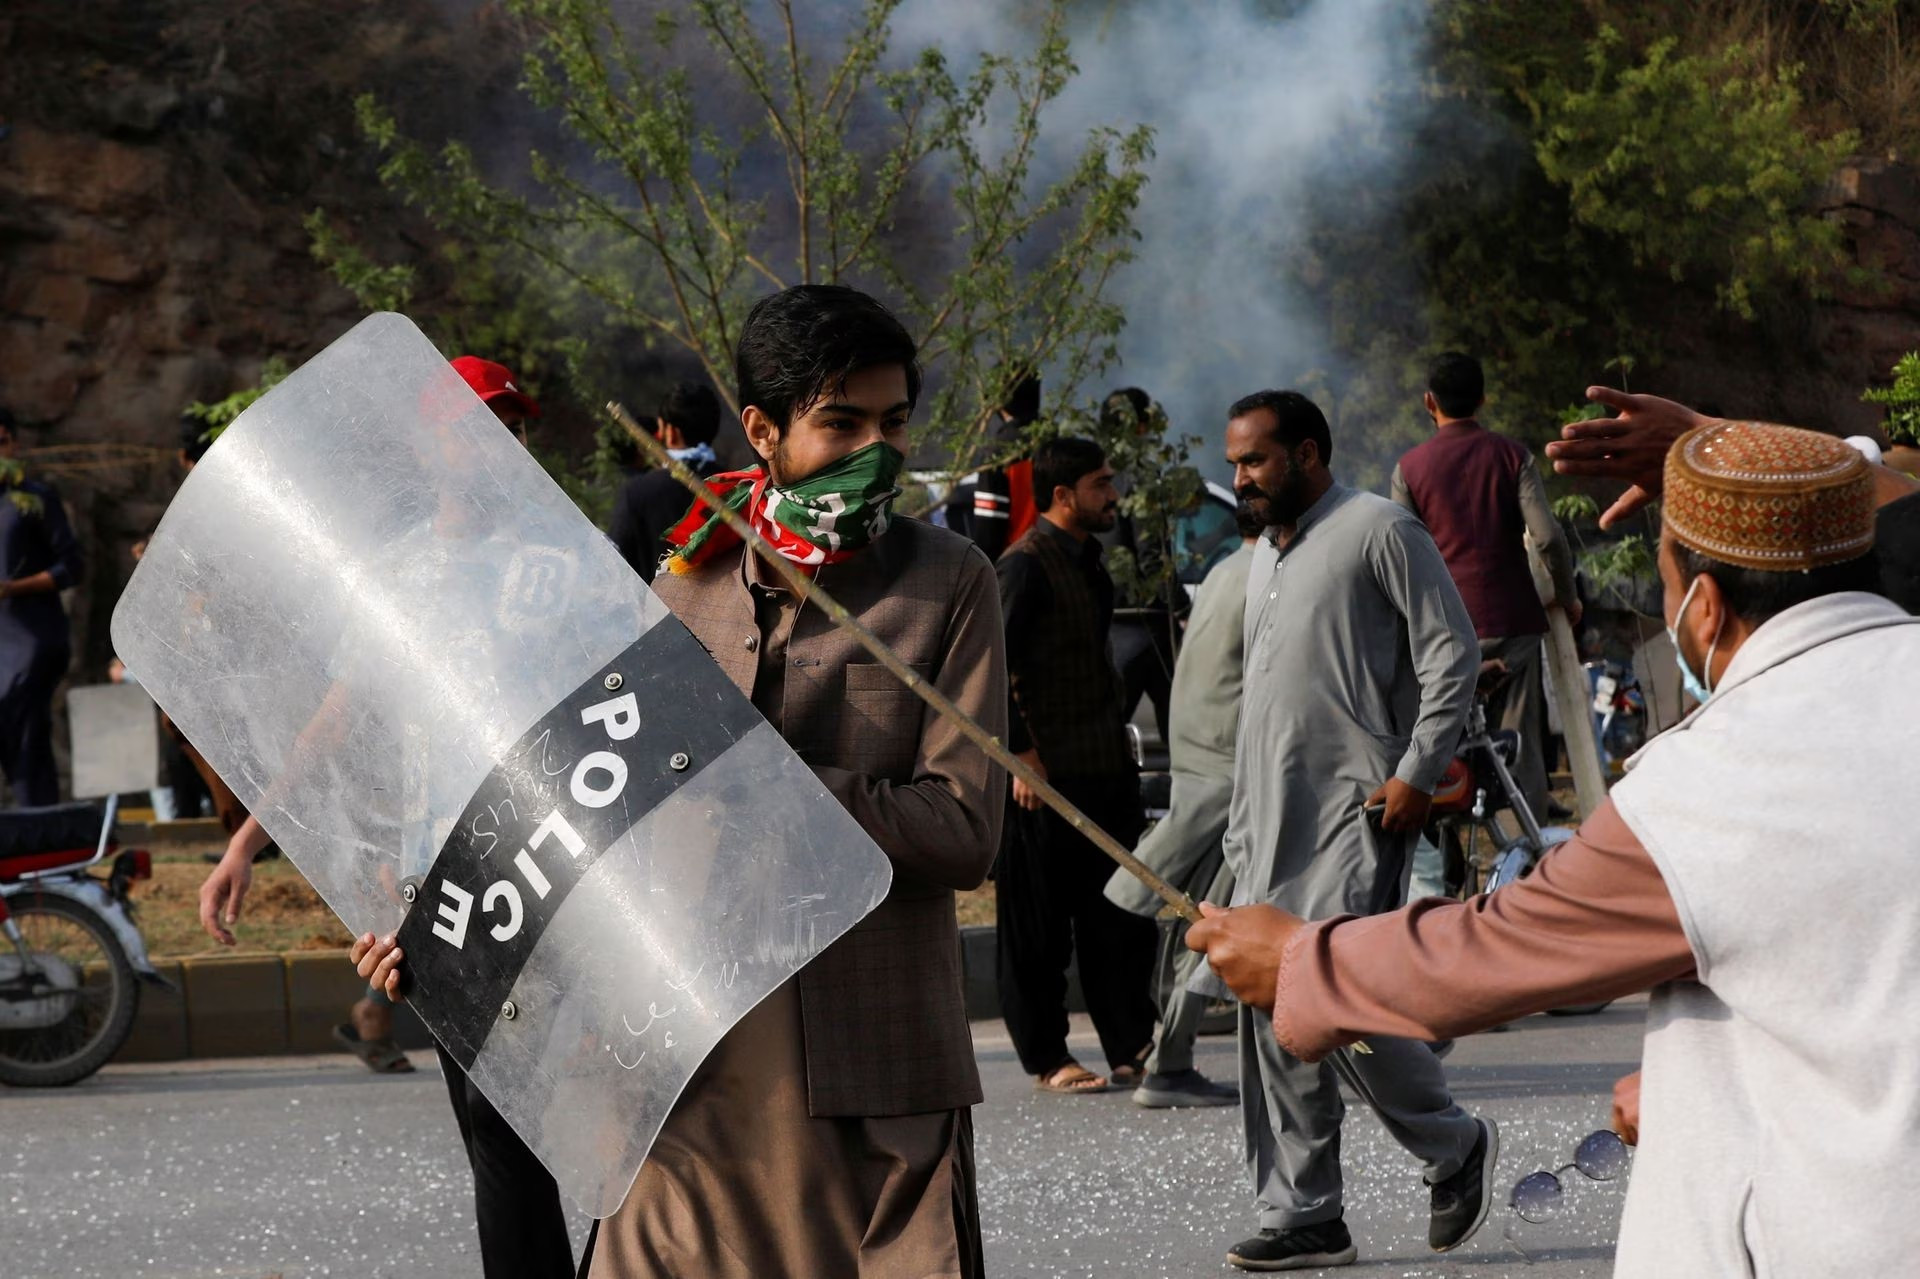 a supporter of former prime minister imran khan walks with a riot shield used by the police during a clash outside the federal judicial complex in islamabad pakistan march 18 2023 photo reuters